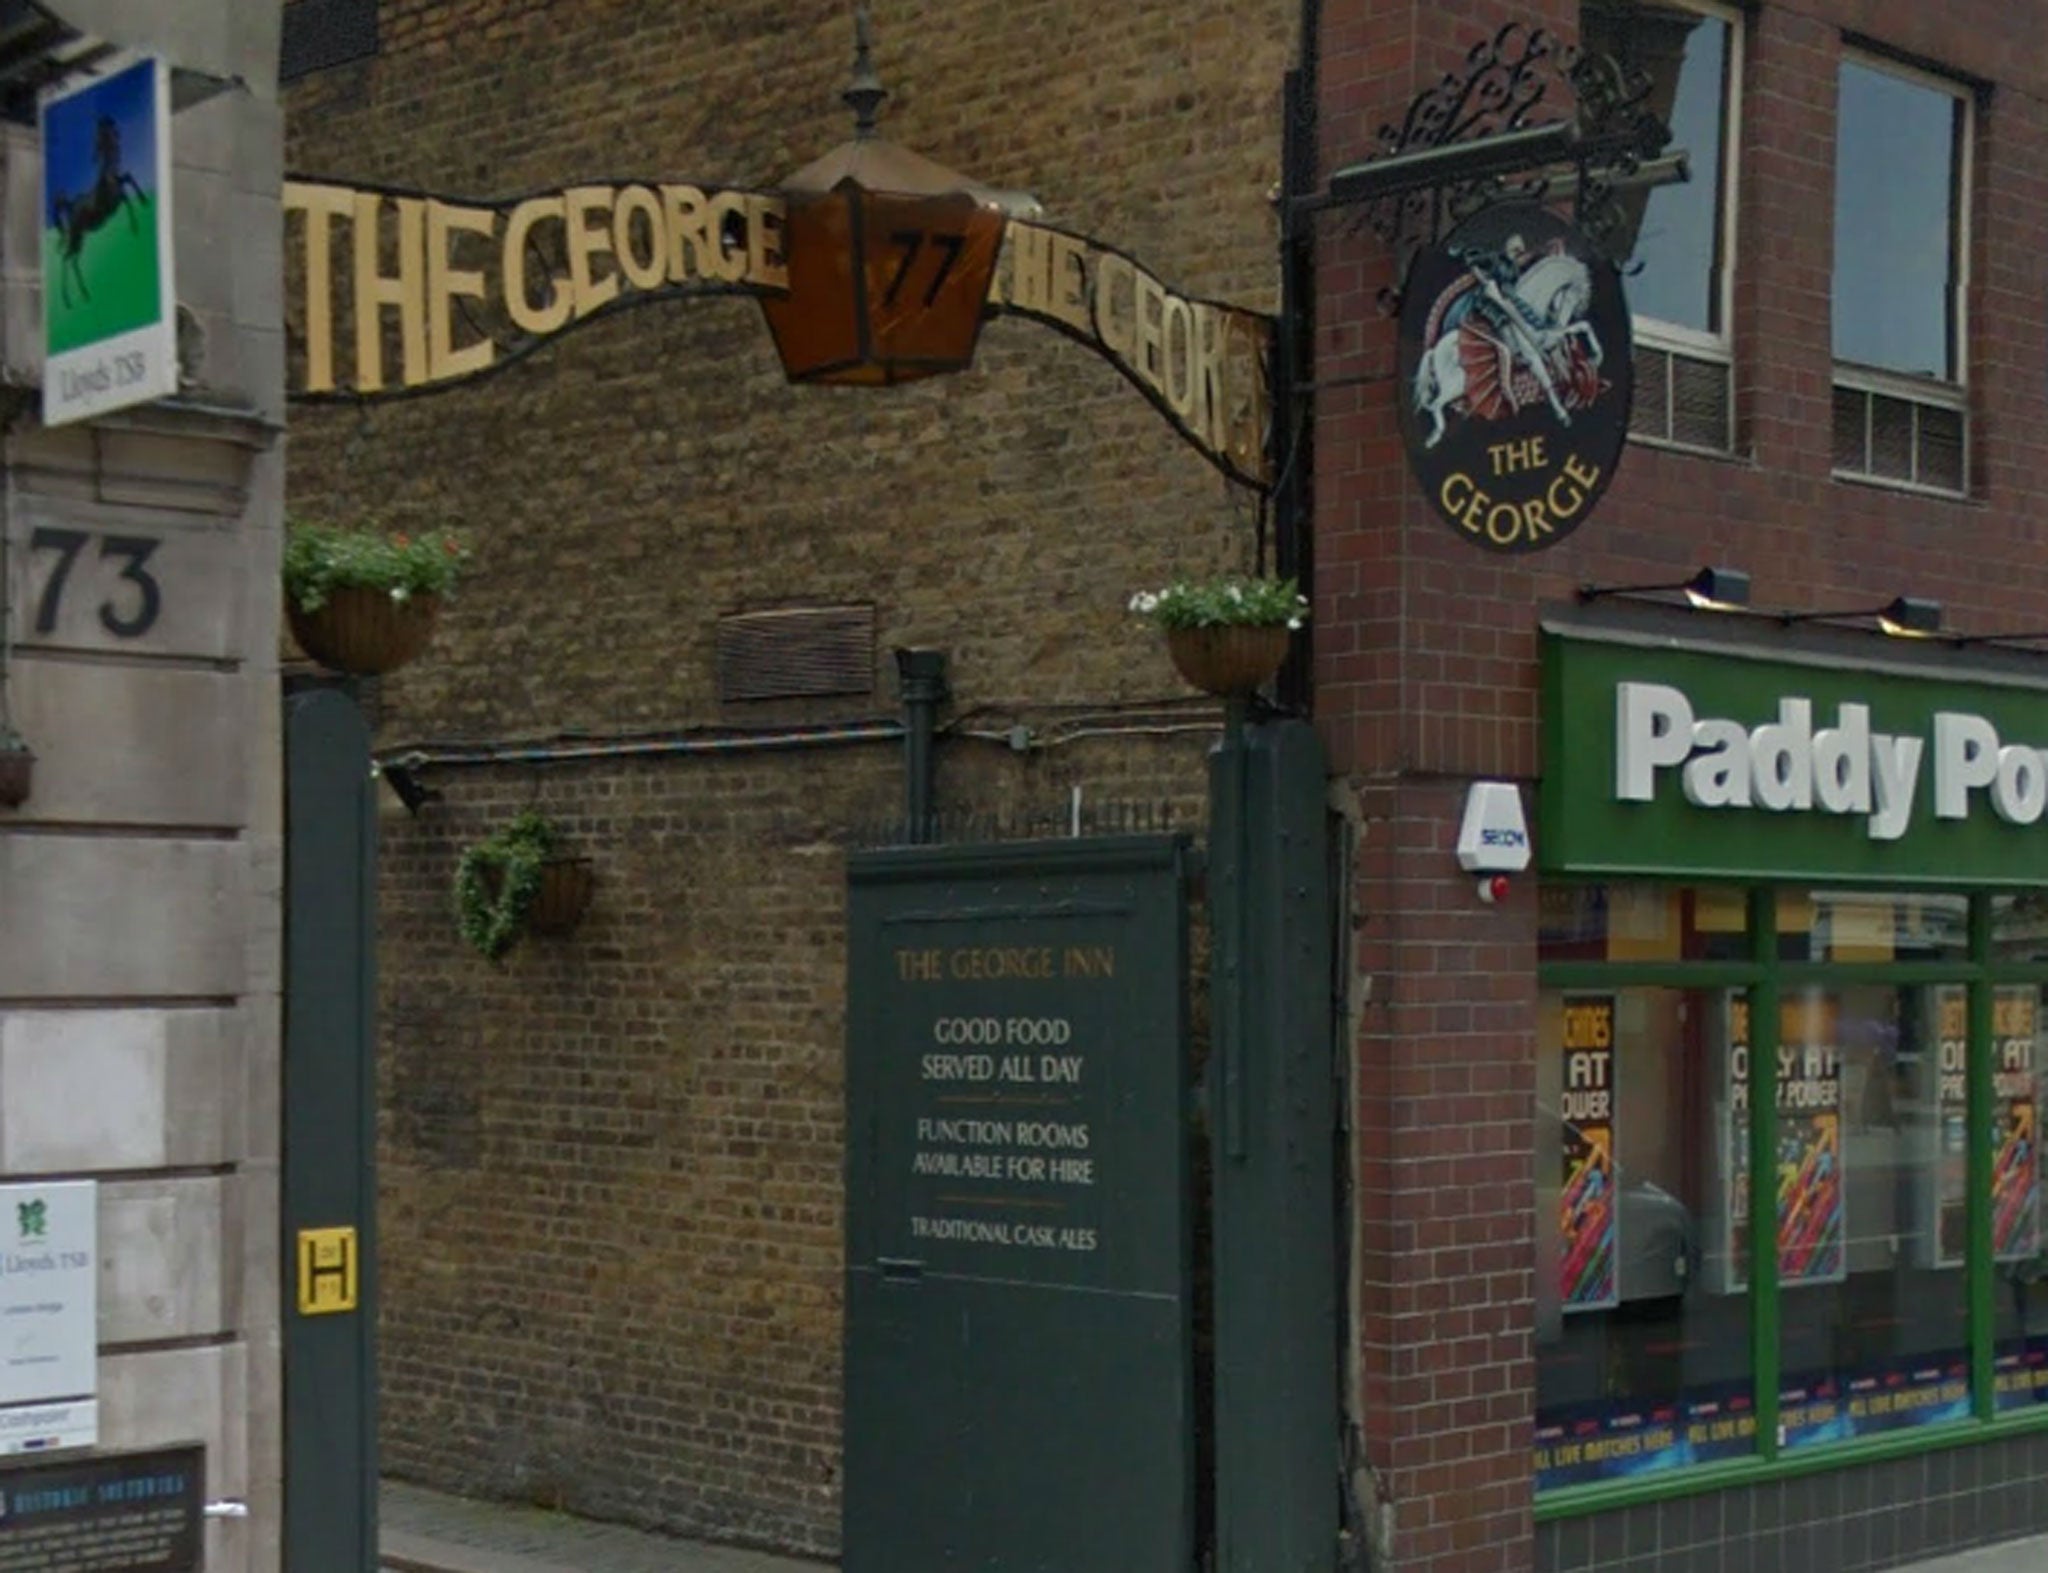 The George pub, in central London